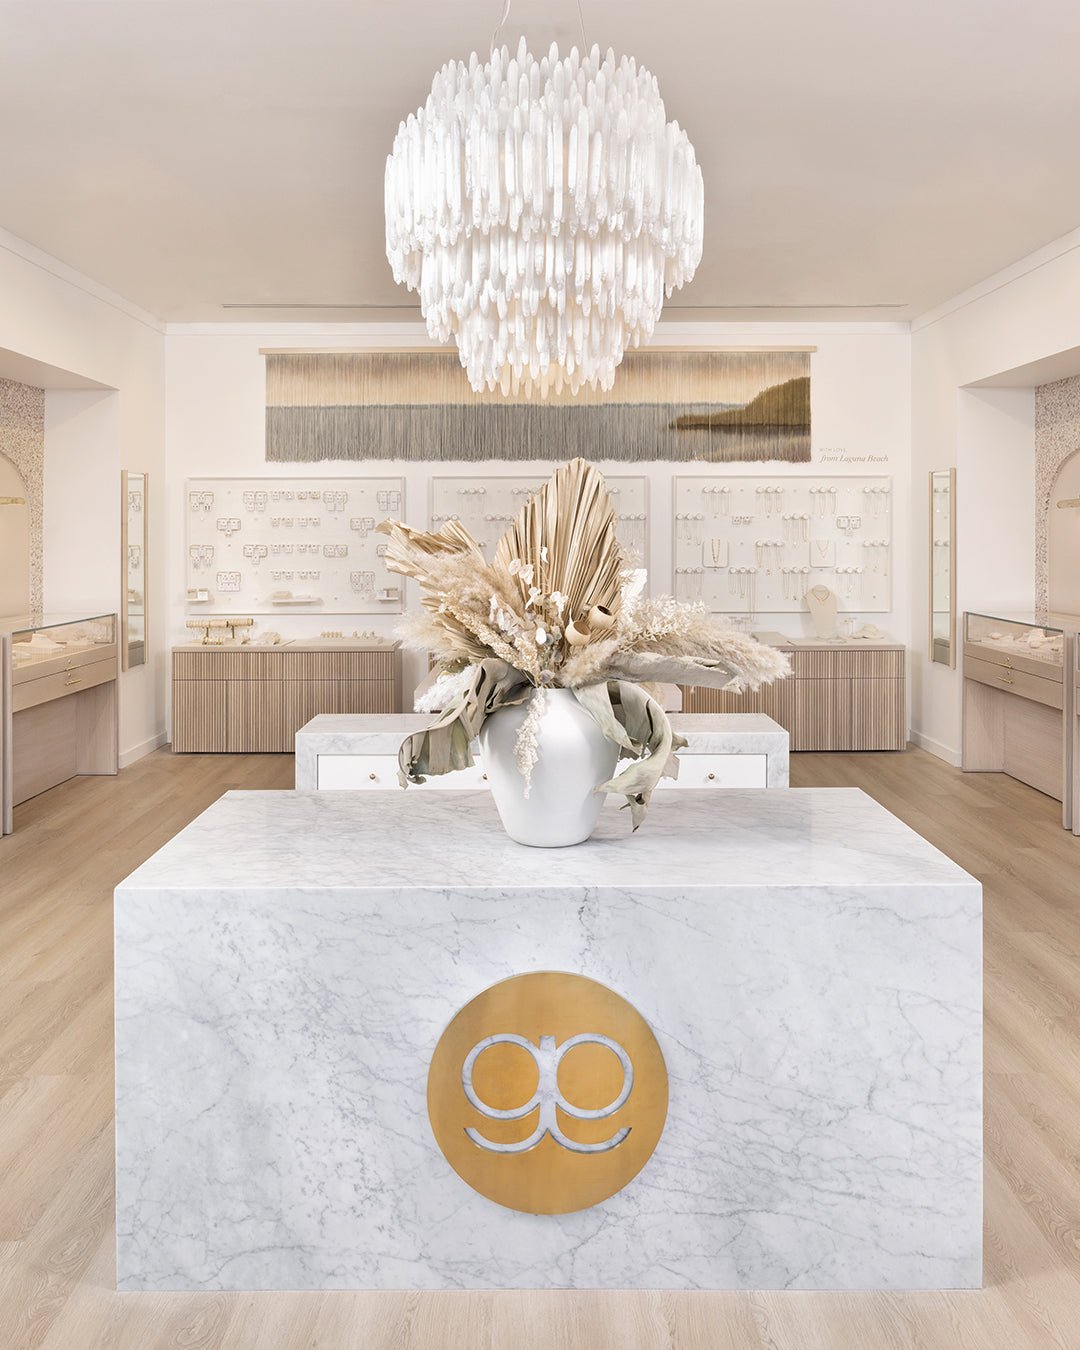 interior of gorjana store with marble counter with gorjana logo and big white chandelier